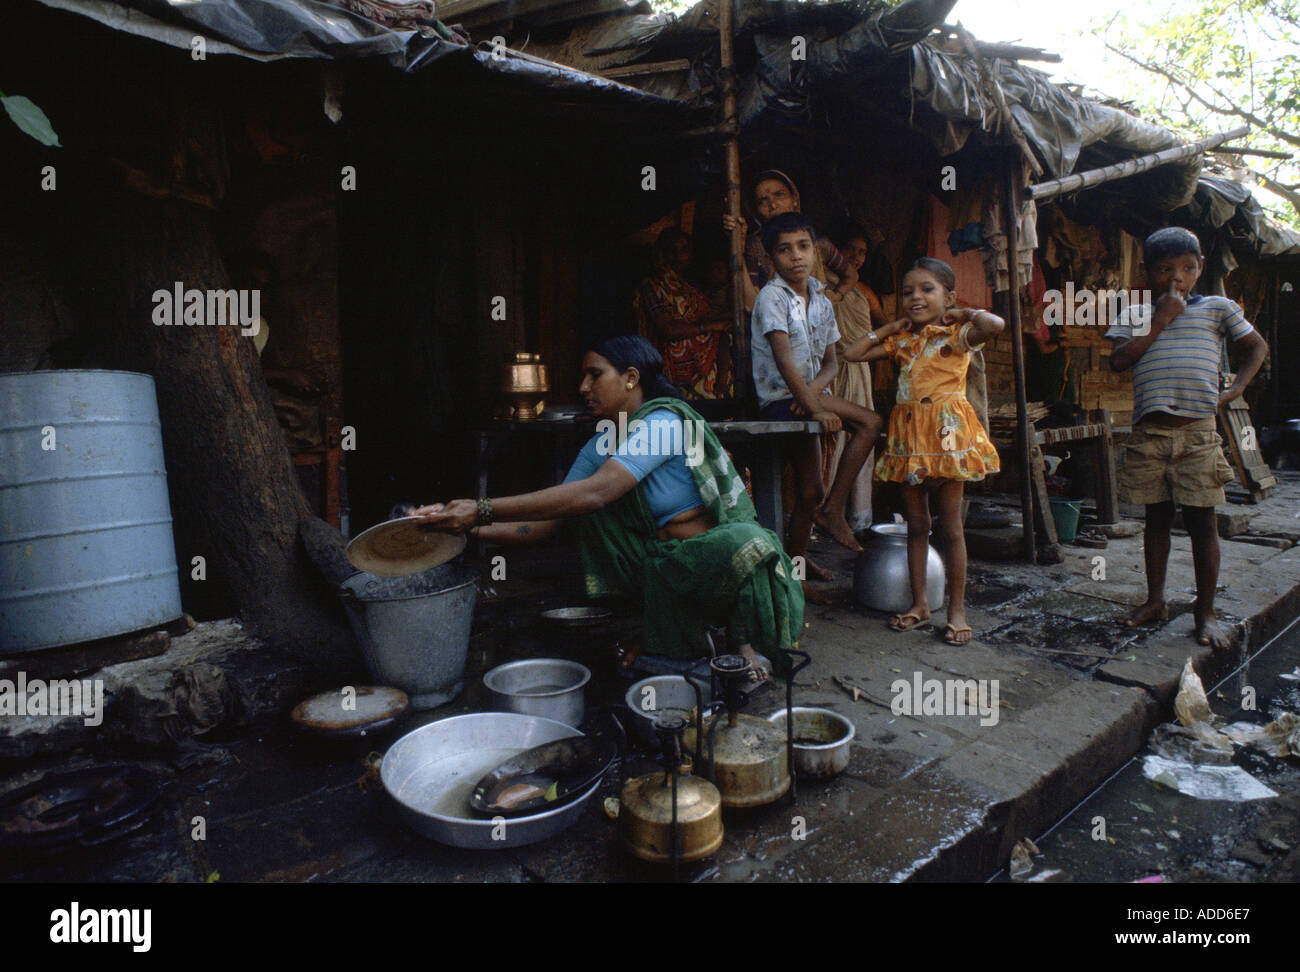 Children watch as woman washes dishes in bucket at shack home on the sidewalk Bombay India Stock Photo